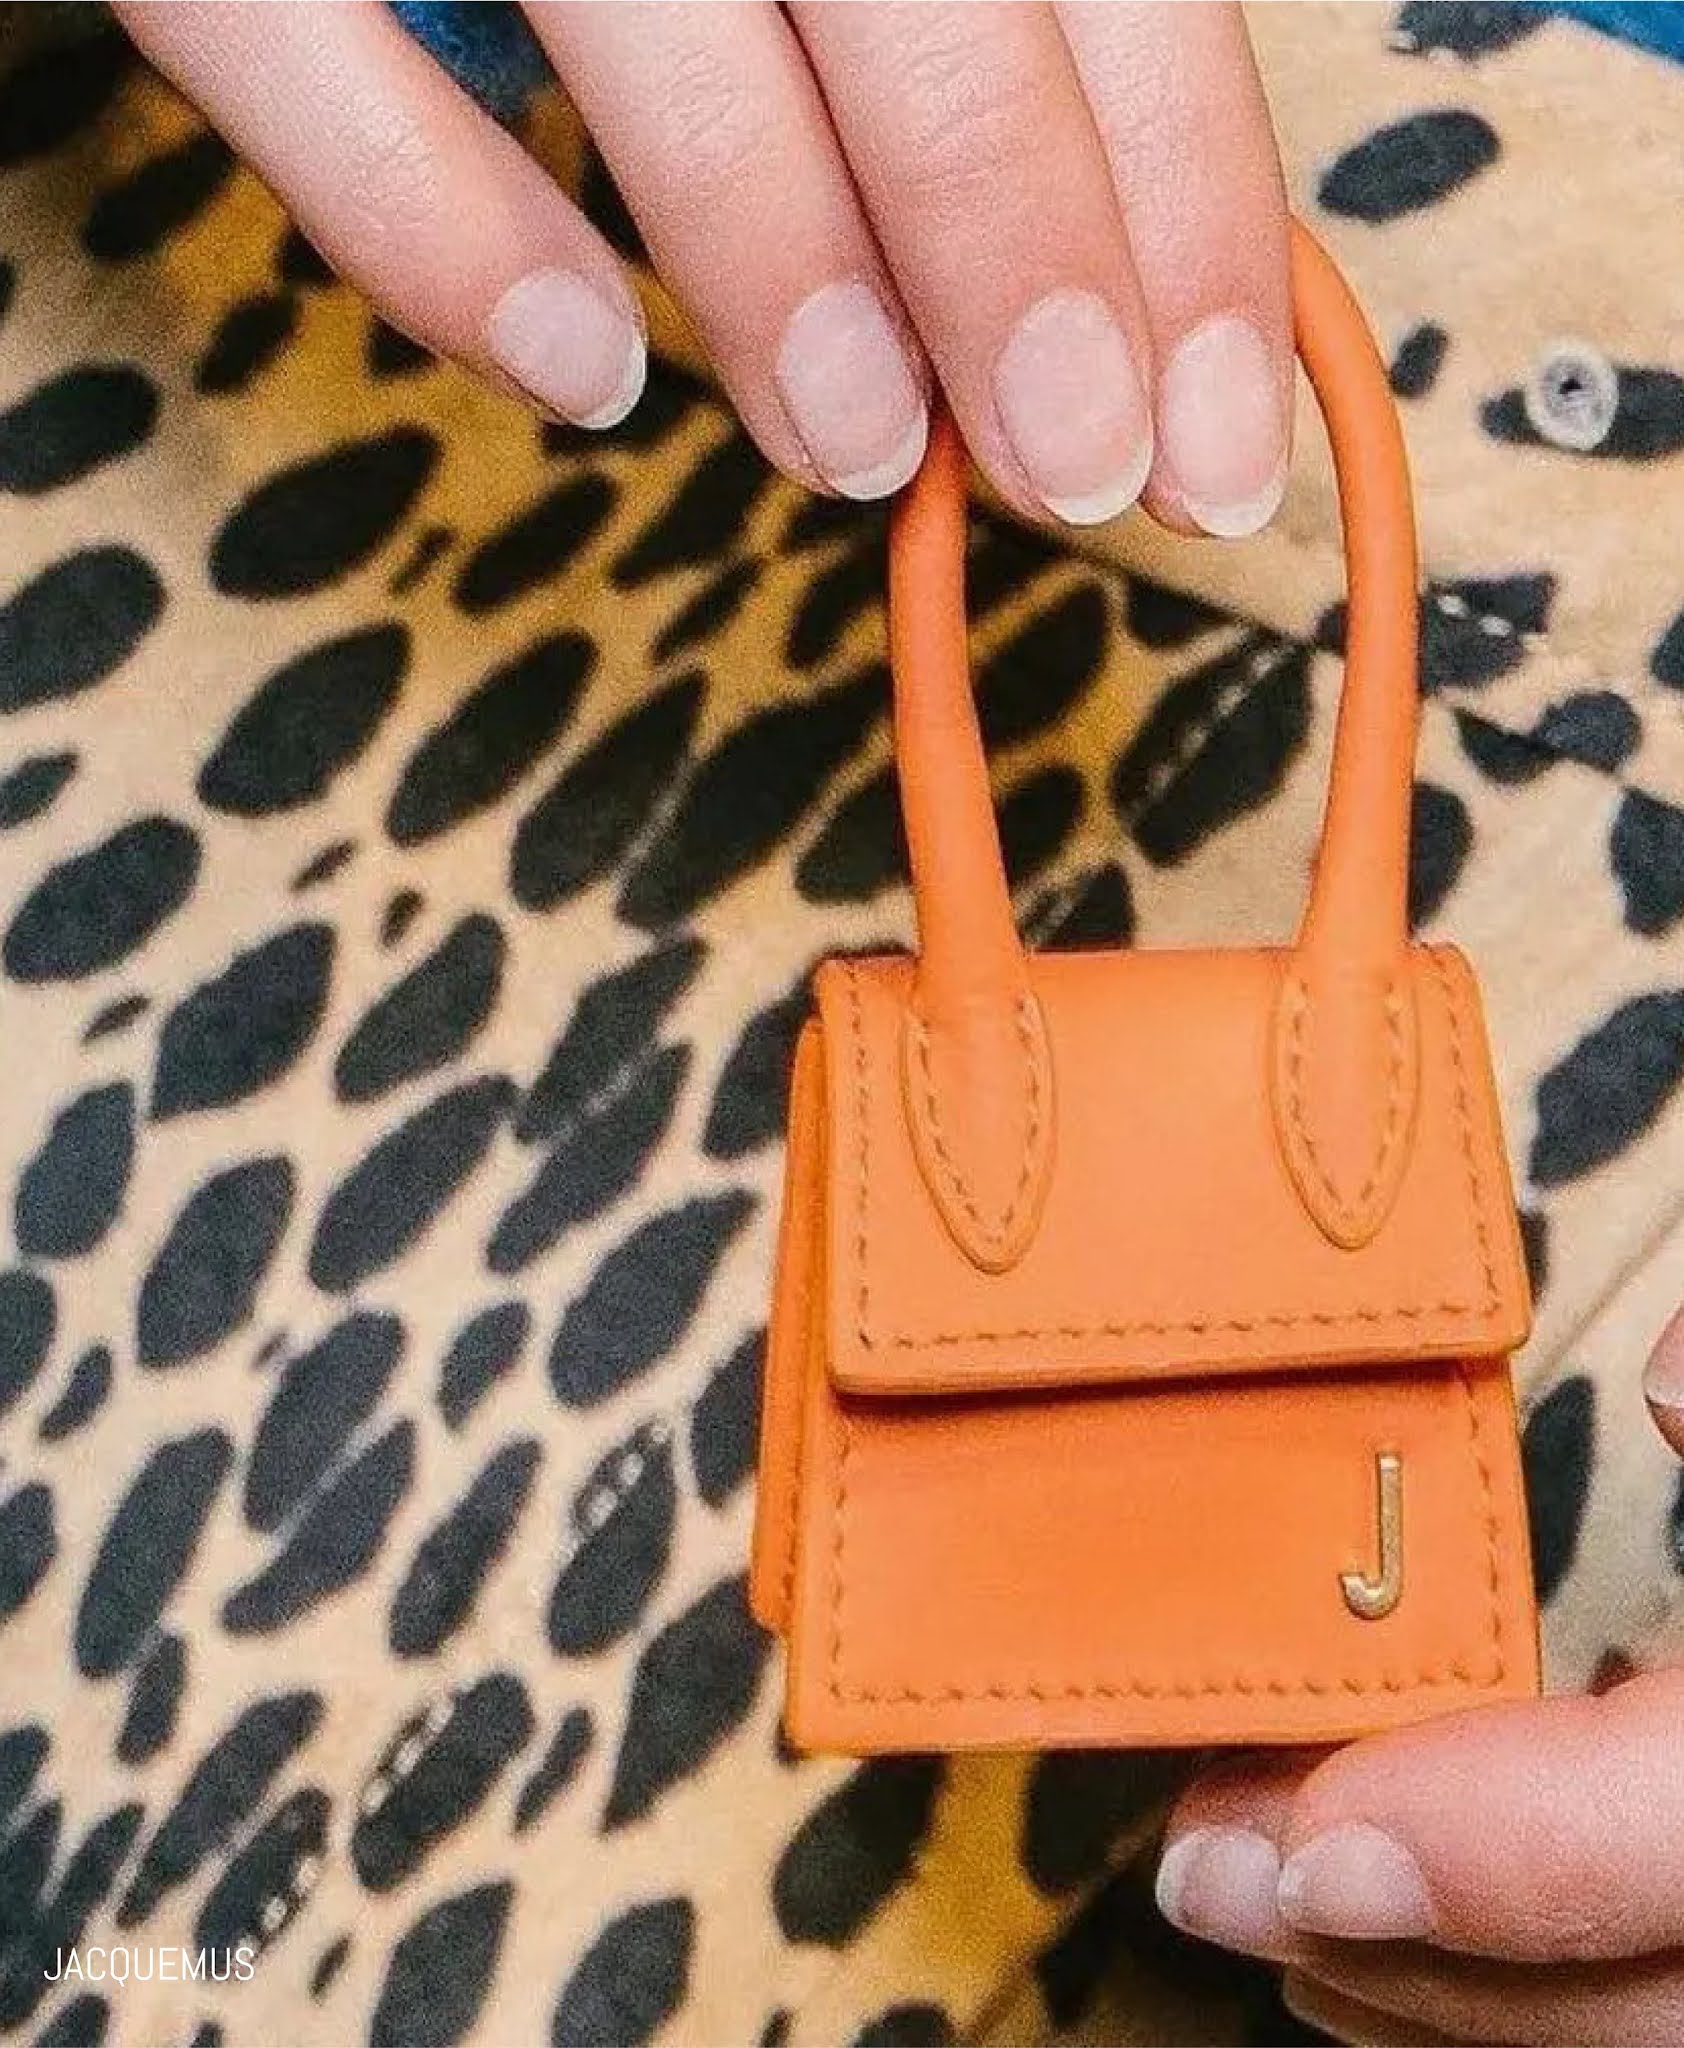 Is Jacquemus' Mini Le Chiquito bag proof that the micro trend has